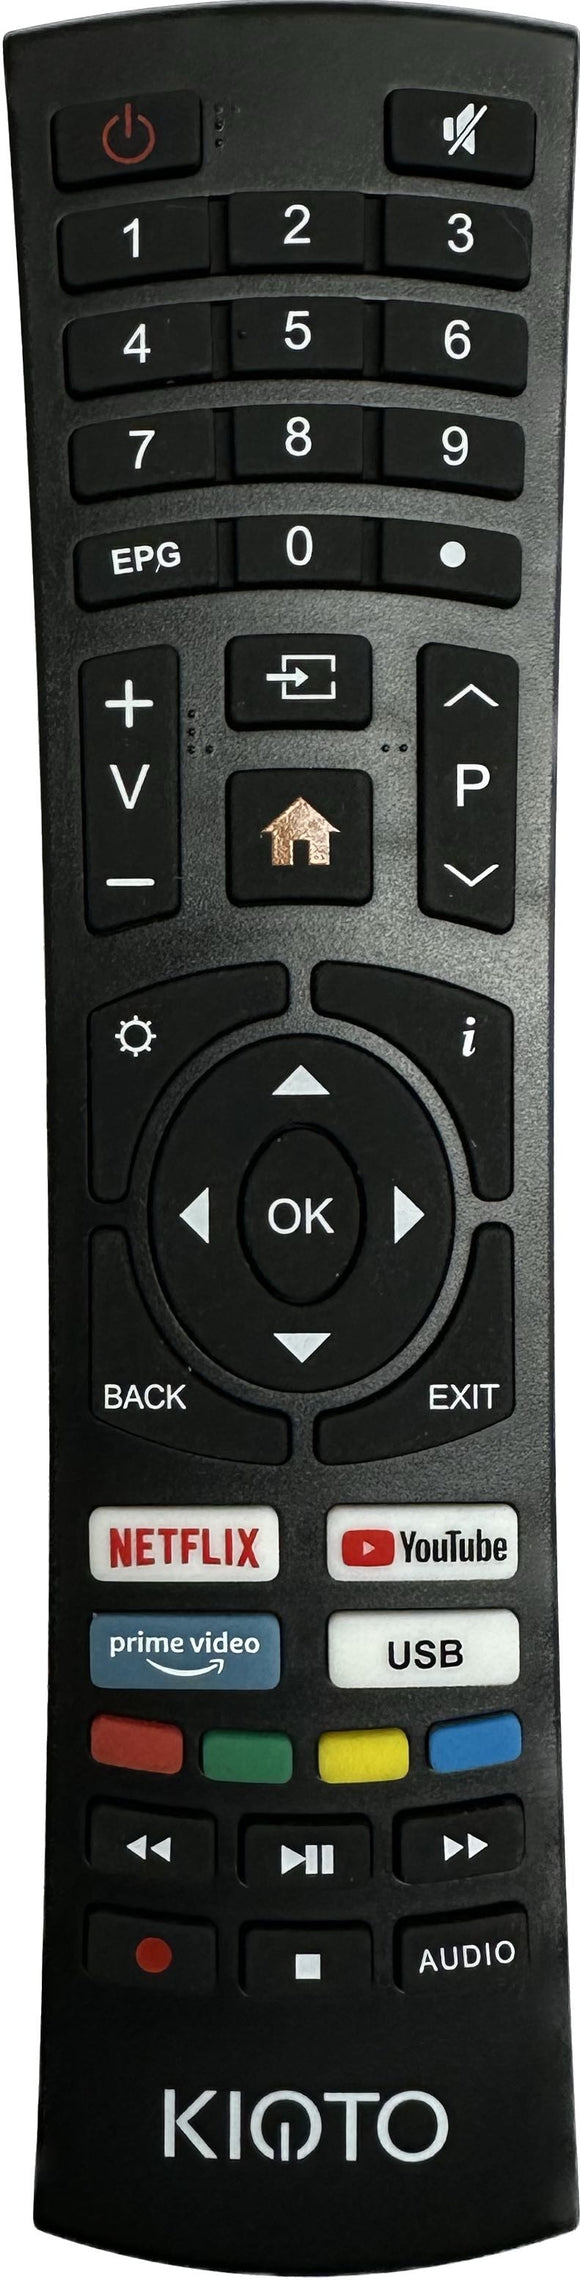 BAUHN ATV55UHDS-0920 LCD TV Replacement Remote Control